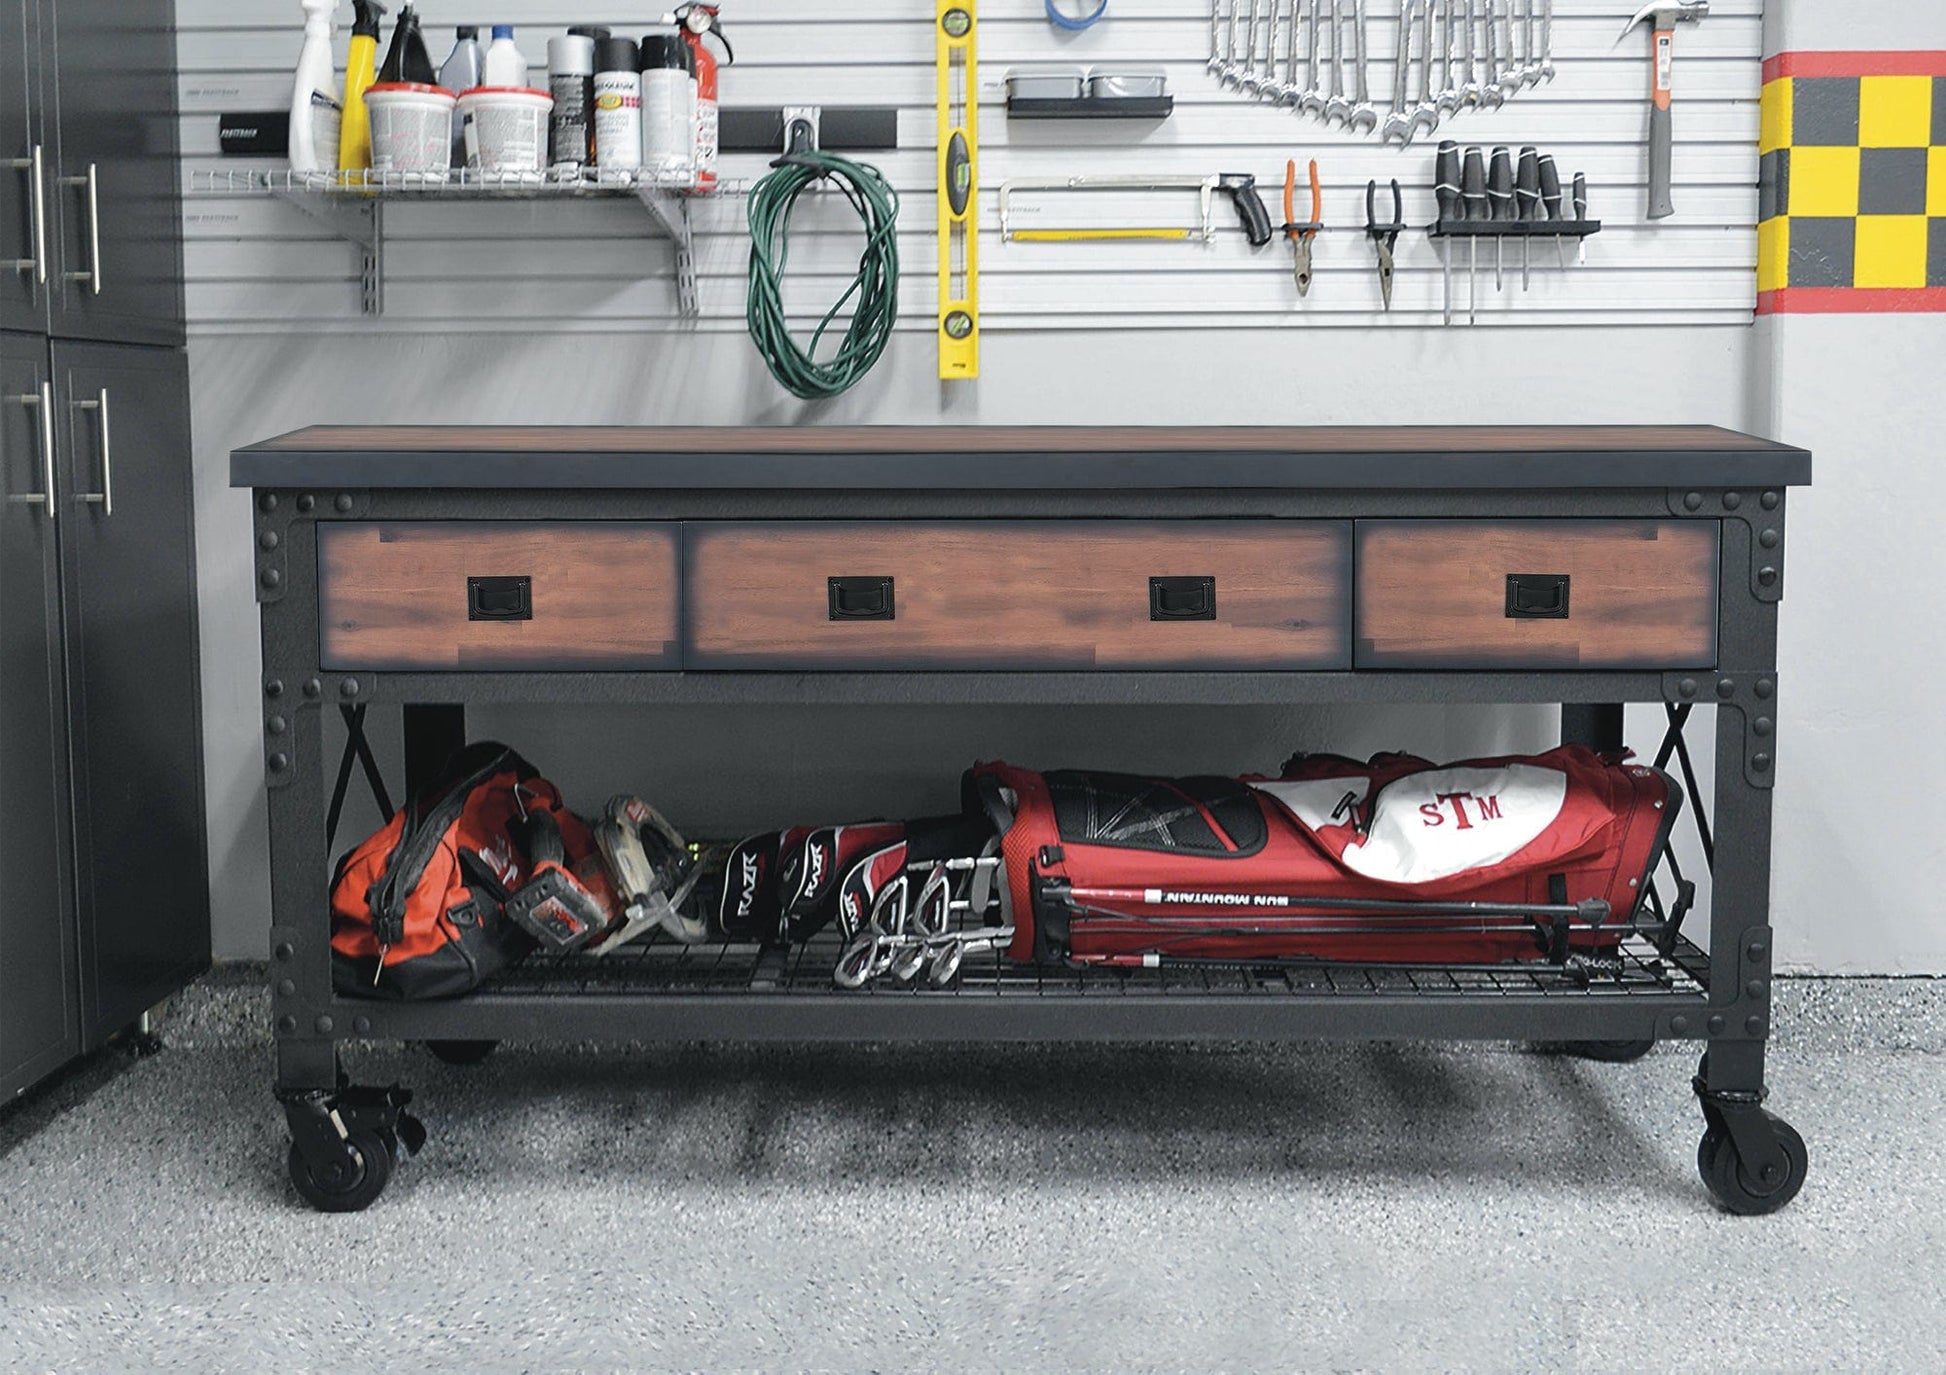 DuraMax 72 In x 24 In 3-Drawer Rolling Industrial Workbench with Wood Top